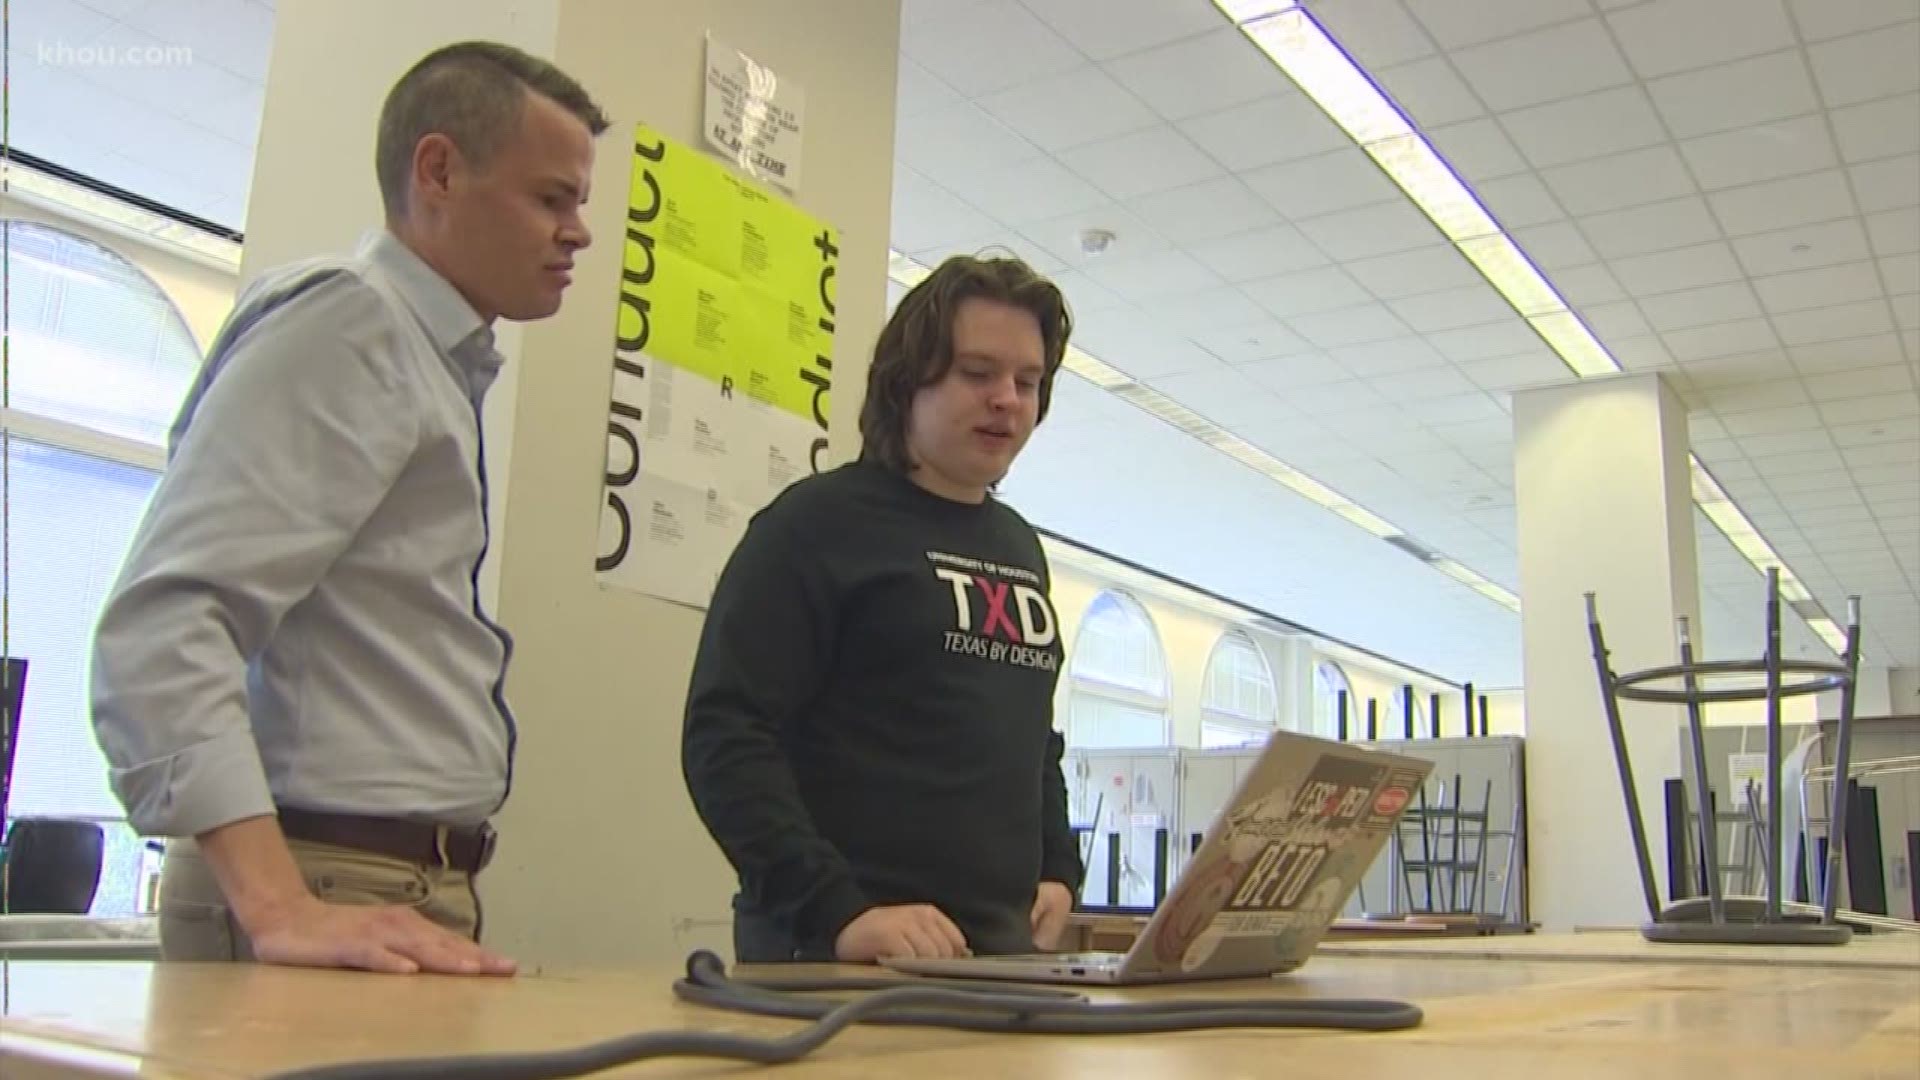 Design students at the University of Houston showed off some of their unique products to KHOU 11 reporter Jason Miles ahead of a convention in Dallas where there will be buyers from all over the world.